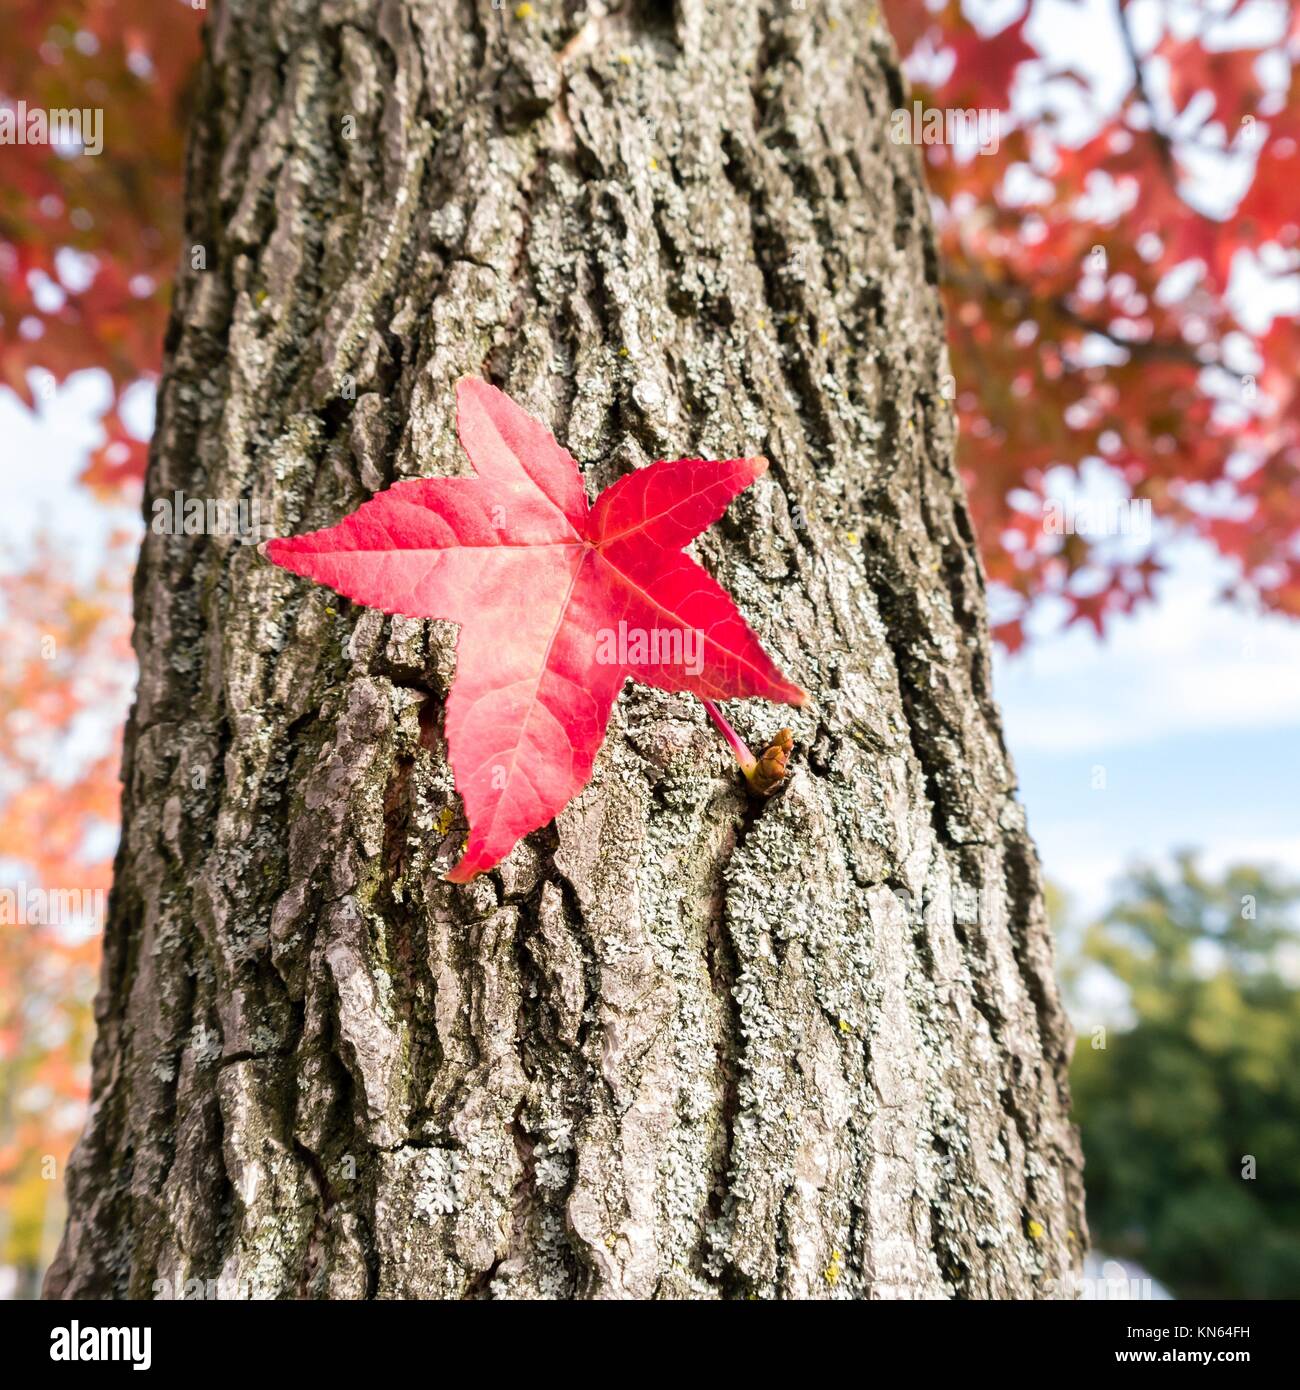 red leaf on a tree in autumn. Stock Photo